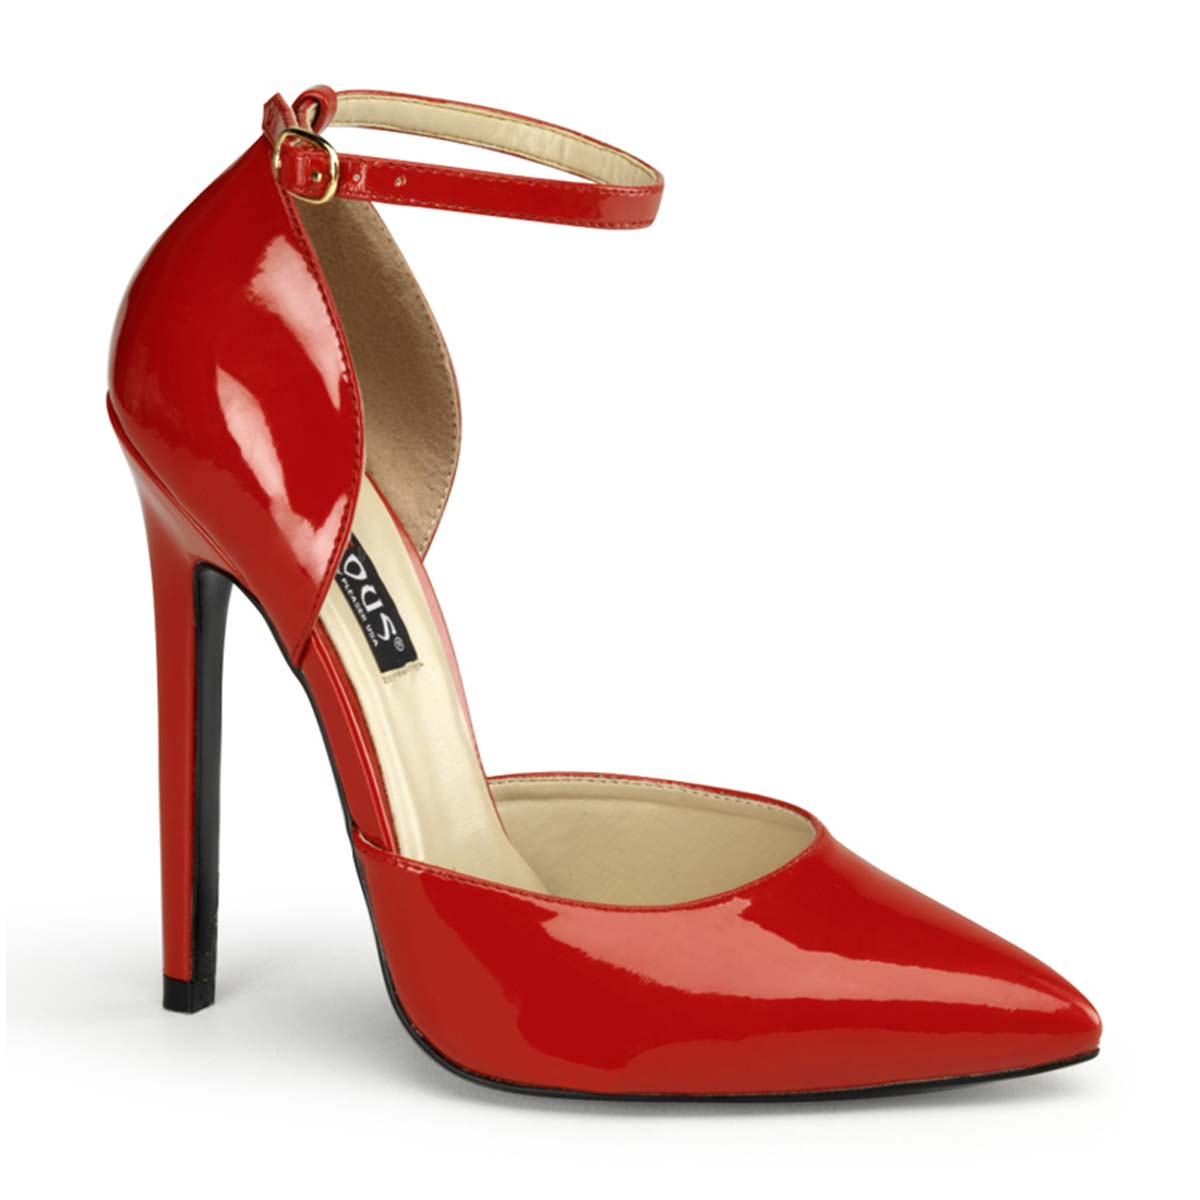 Pleaser Devious Sexy-21 - Red Patent in Sexy Heels & Platforms - $36.95